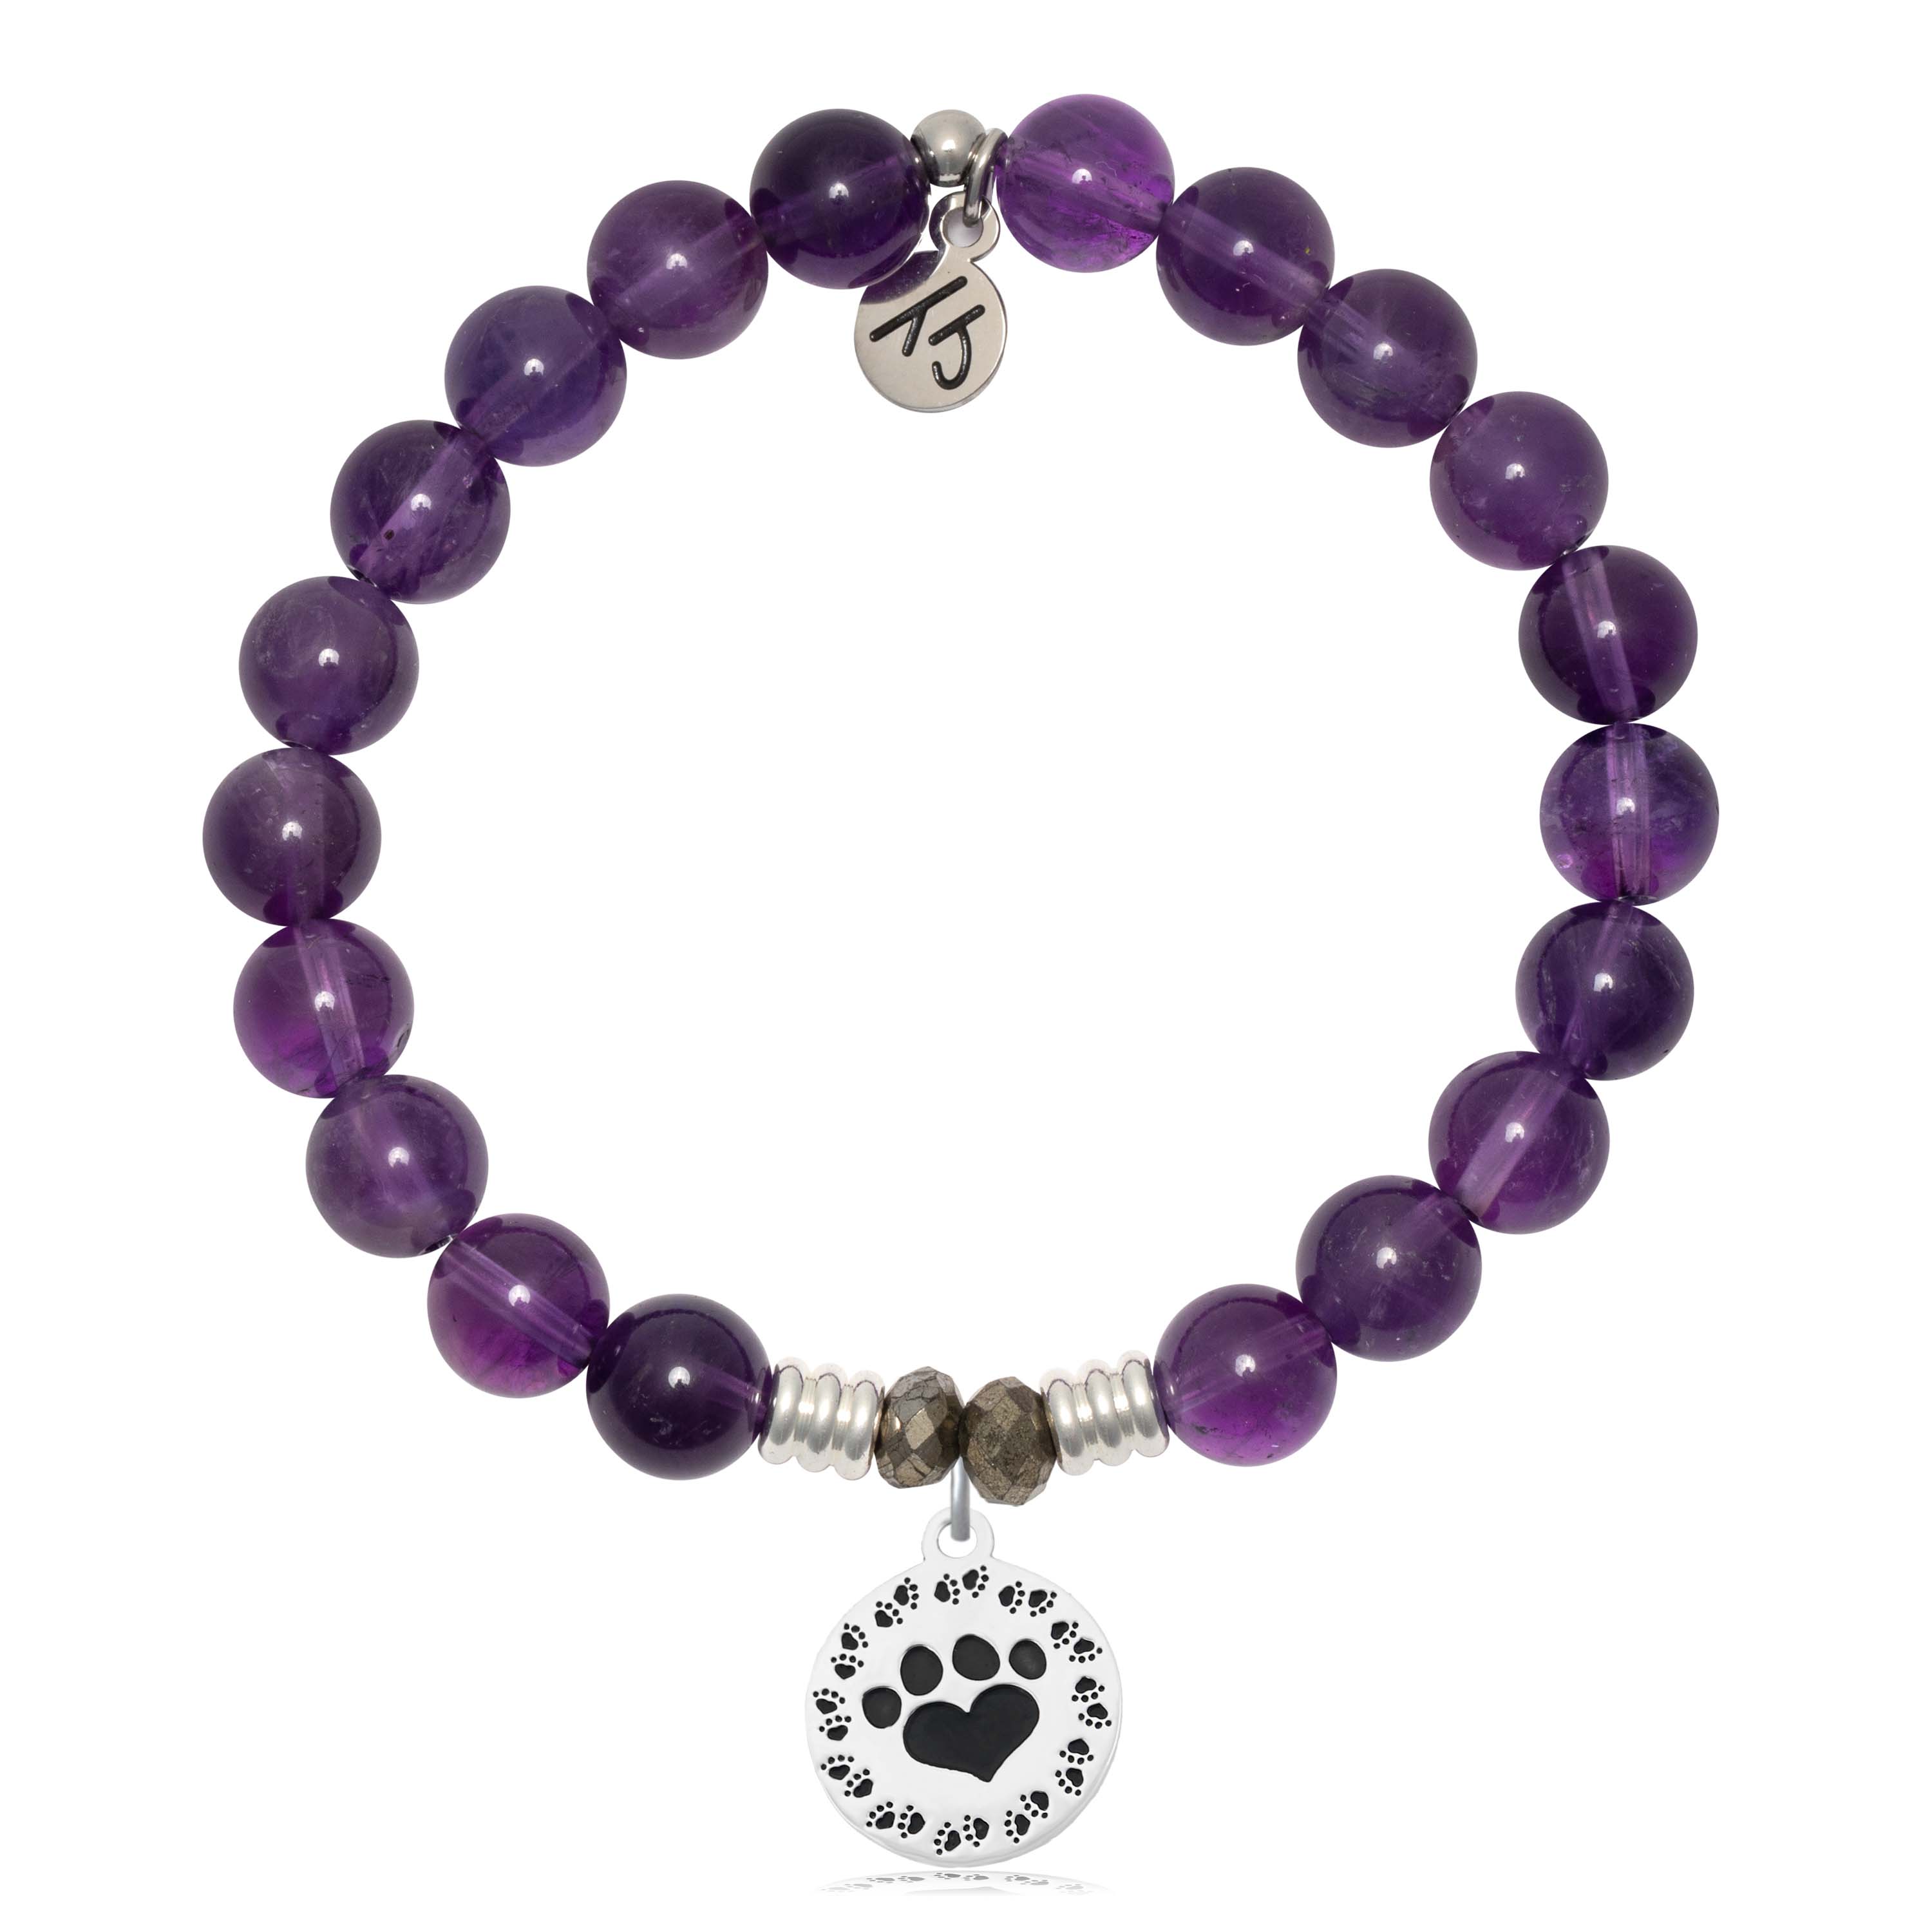 Reiki Charged Original Amethyst Crystal Bracelet with Tree of Life charm -  SoulM